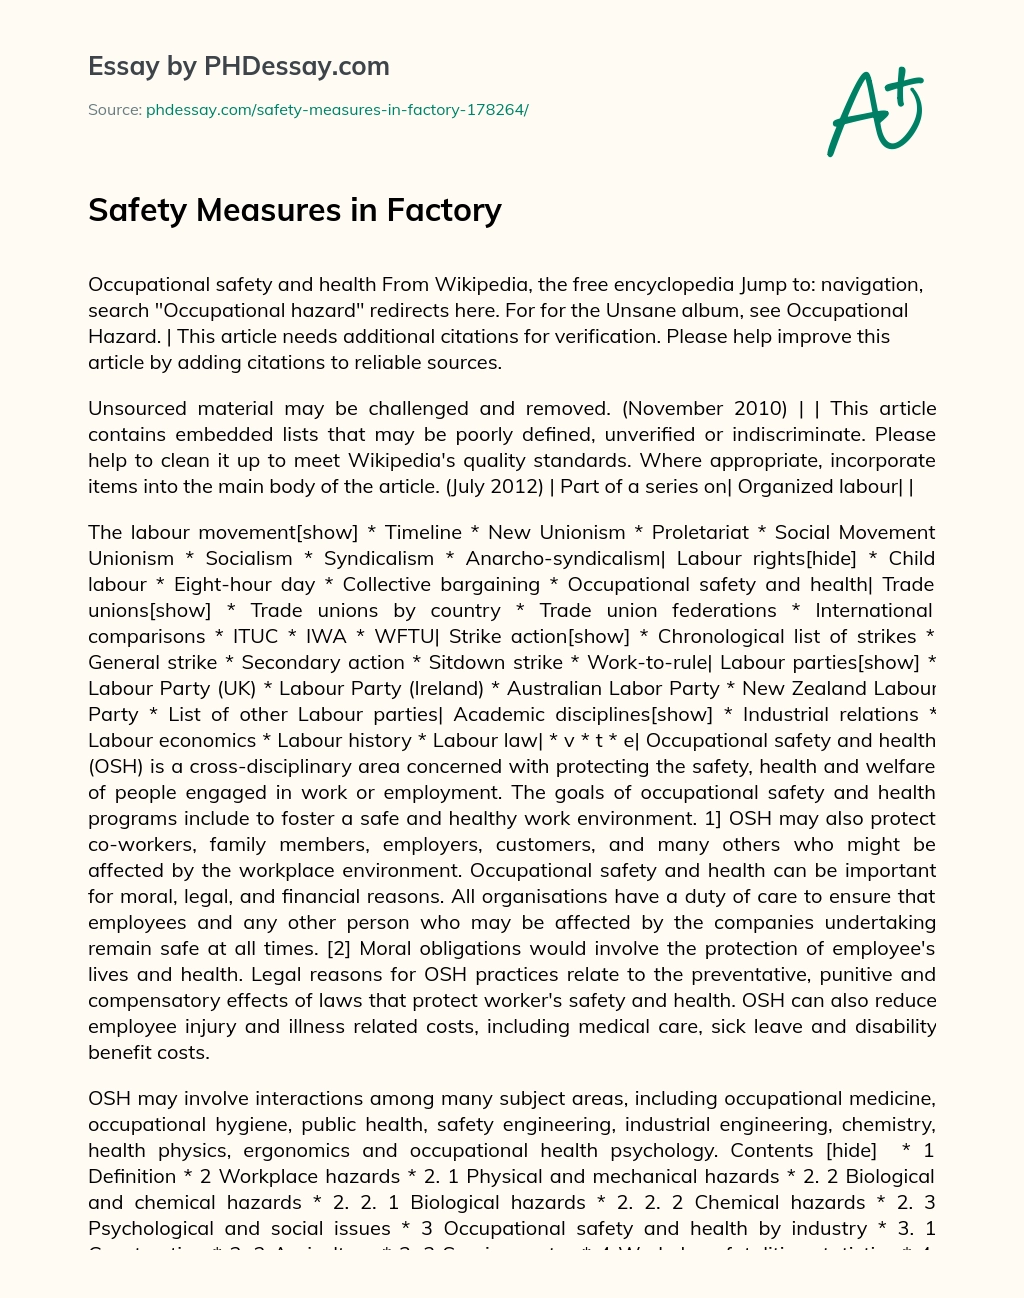 Safety Measures in Factory essay